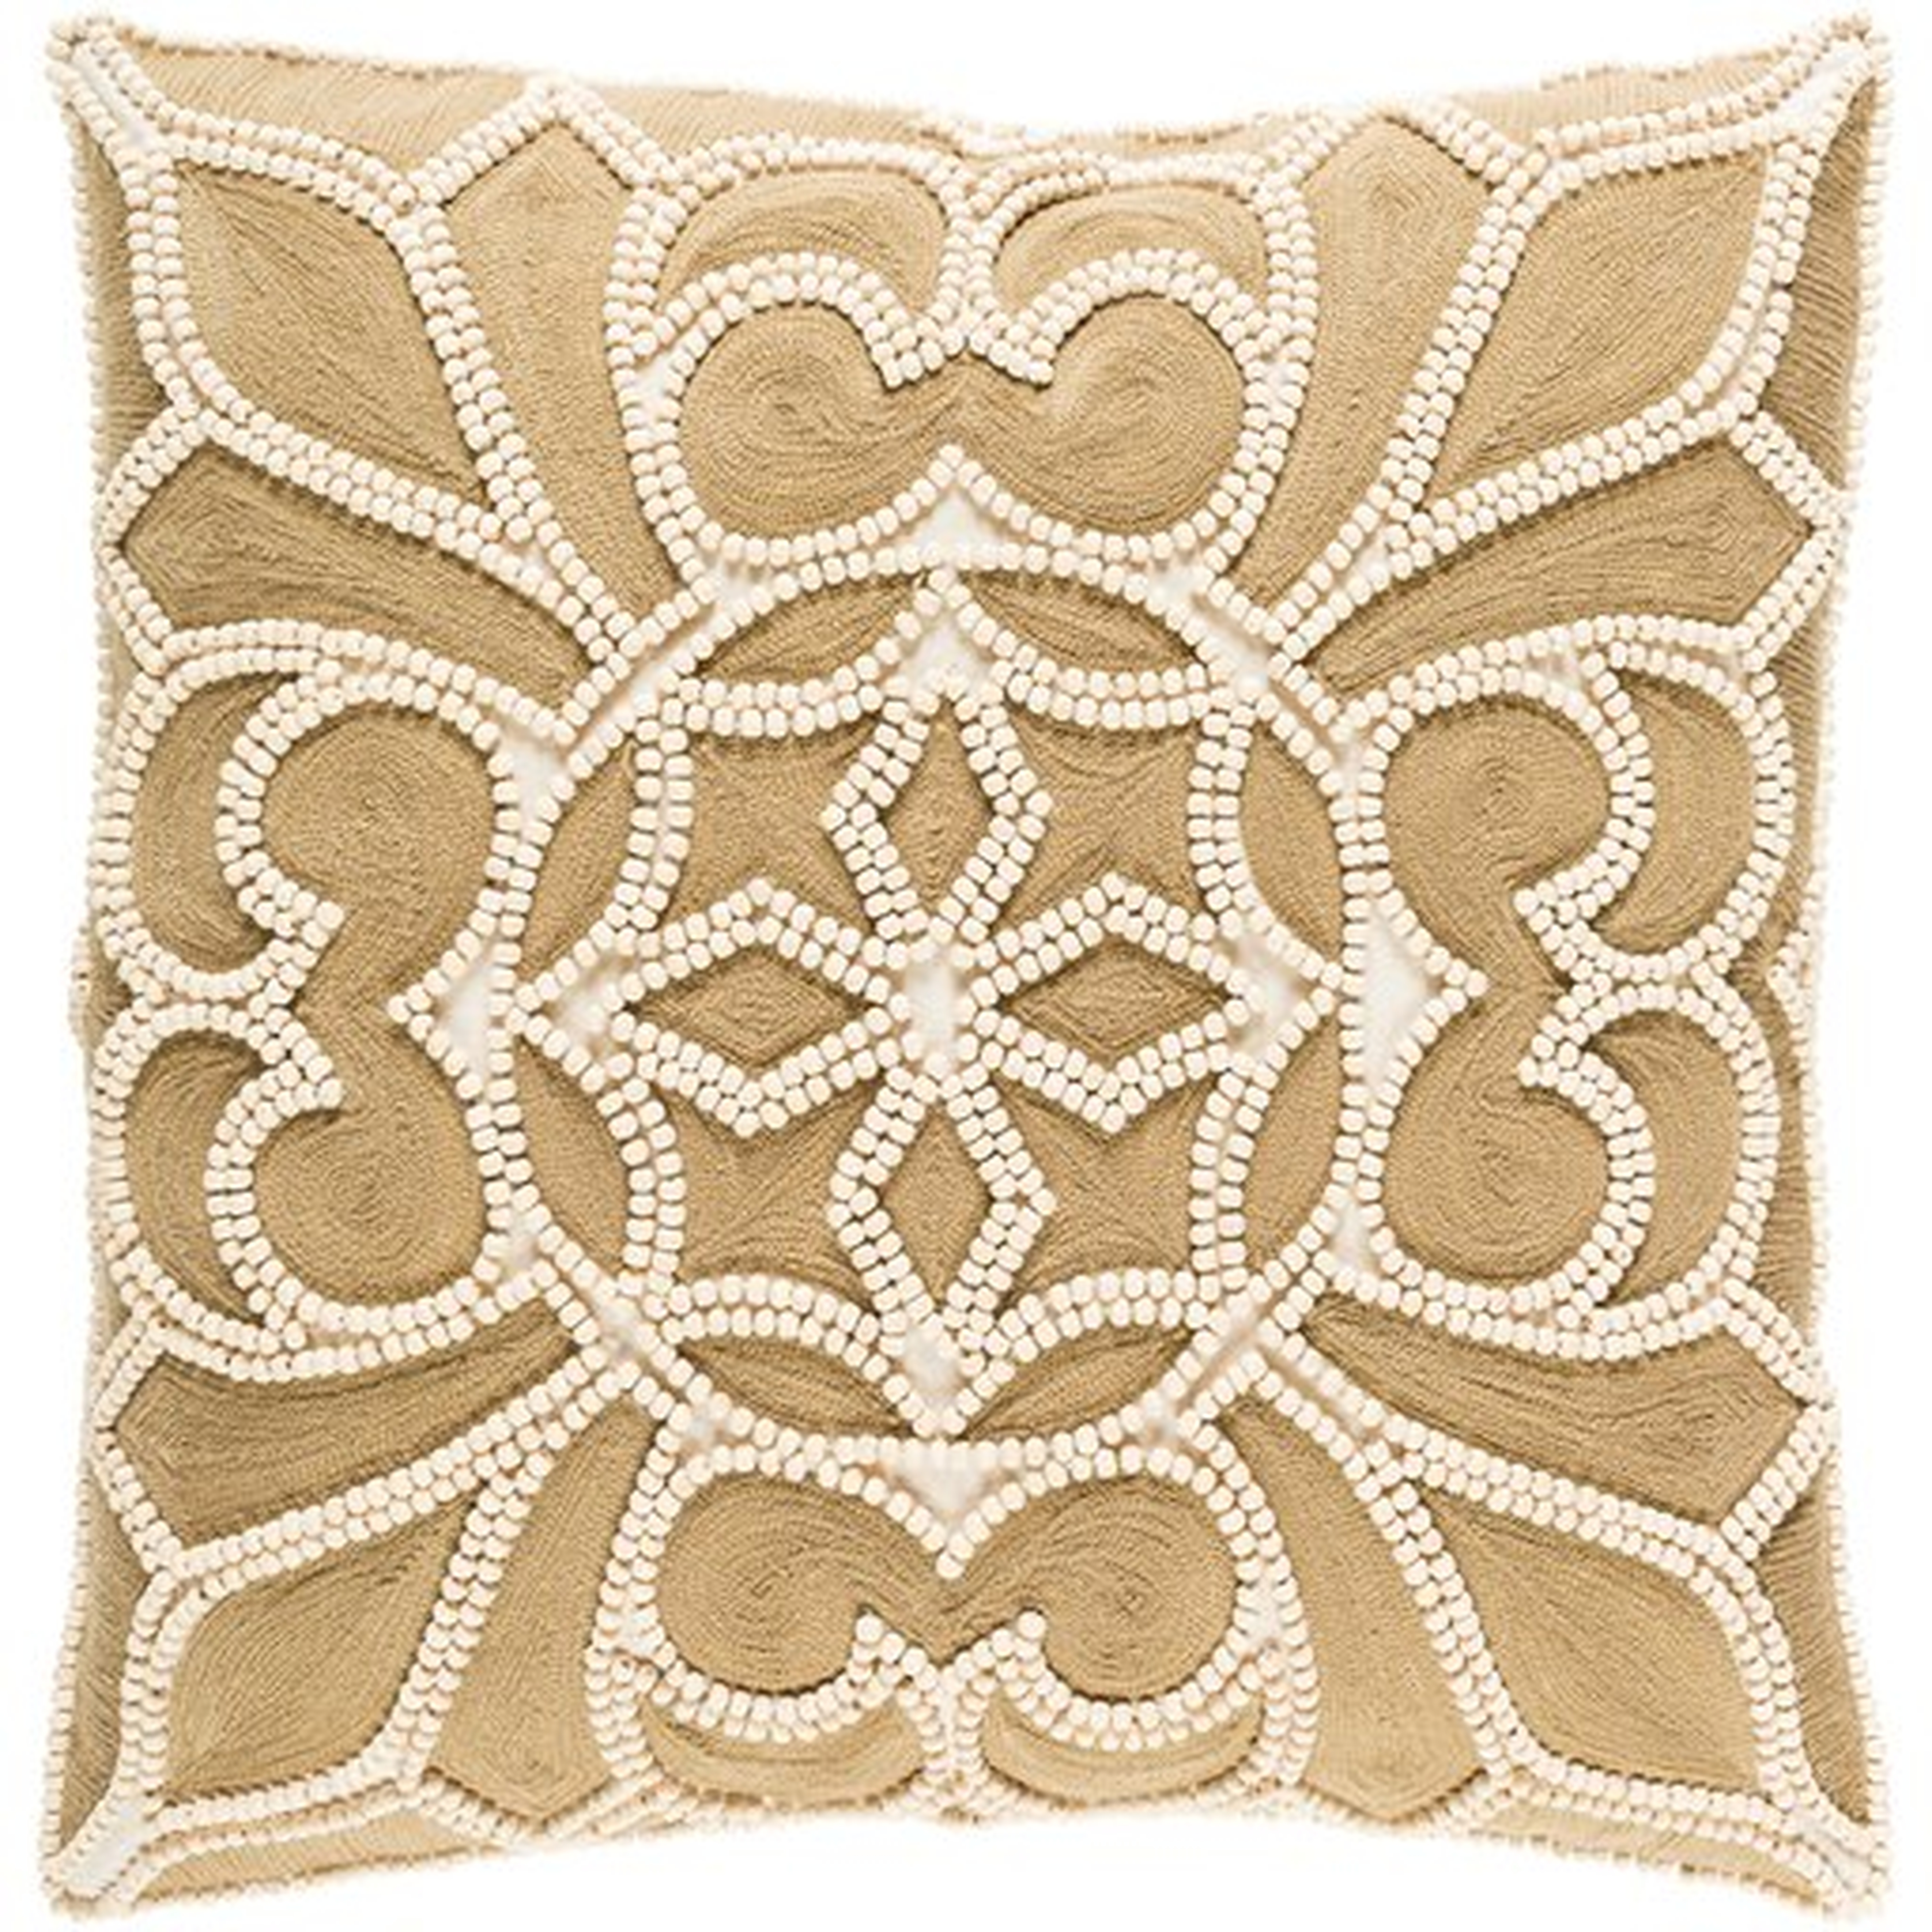 Pastiche Throw Pillow, 20" x 20", with down insert - Surya